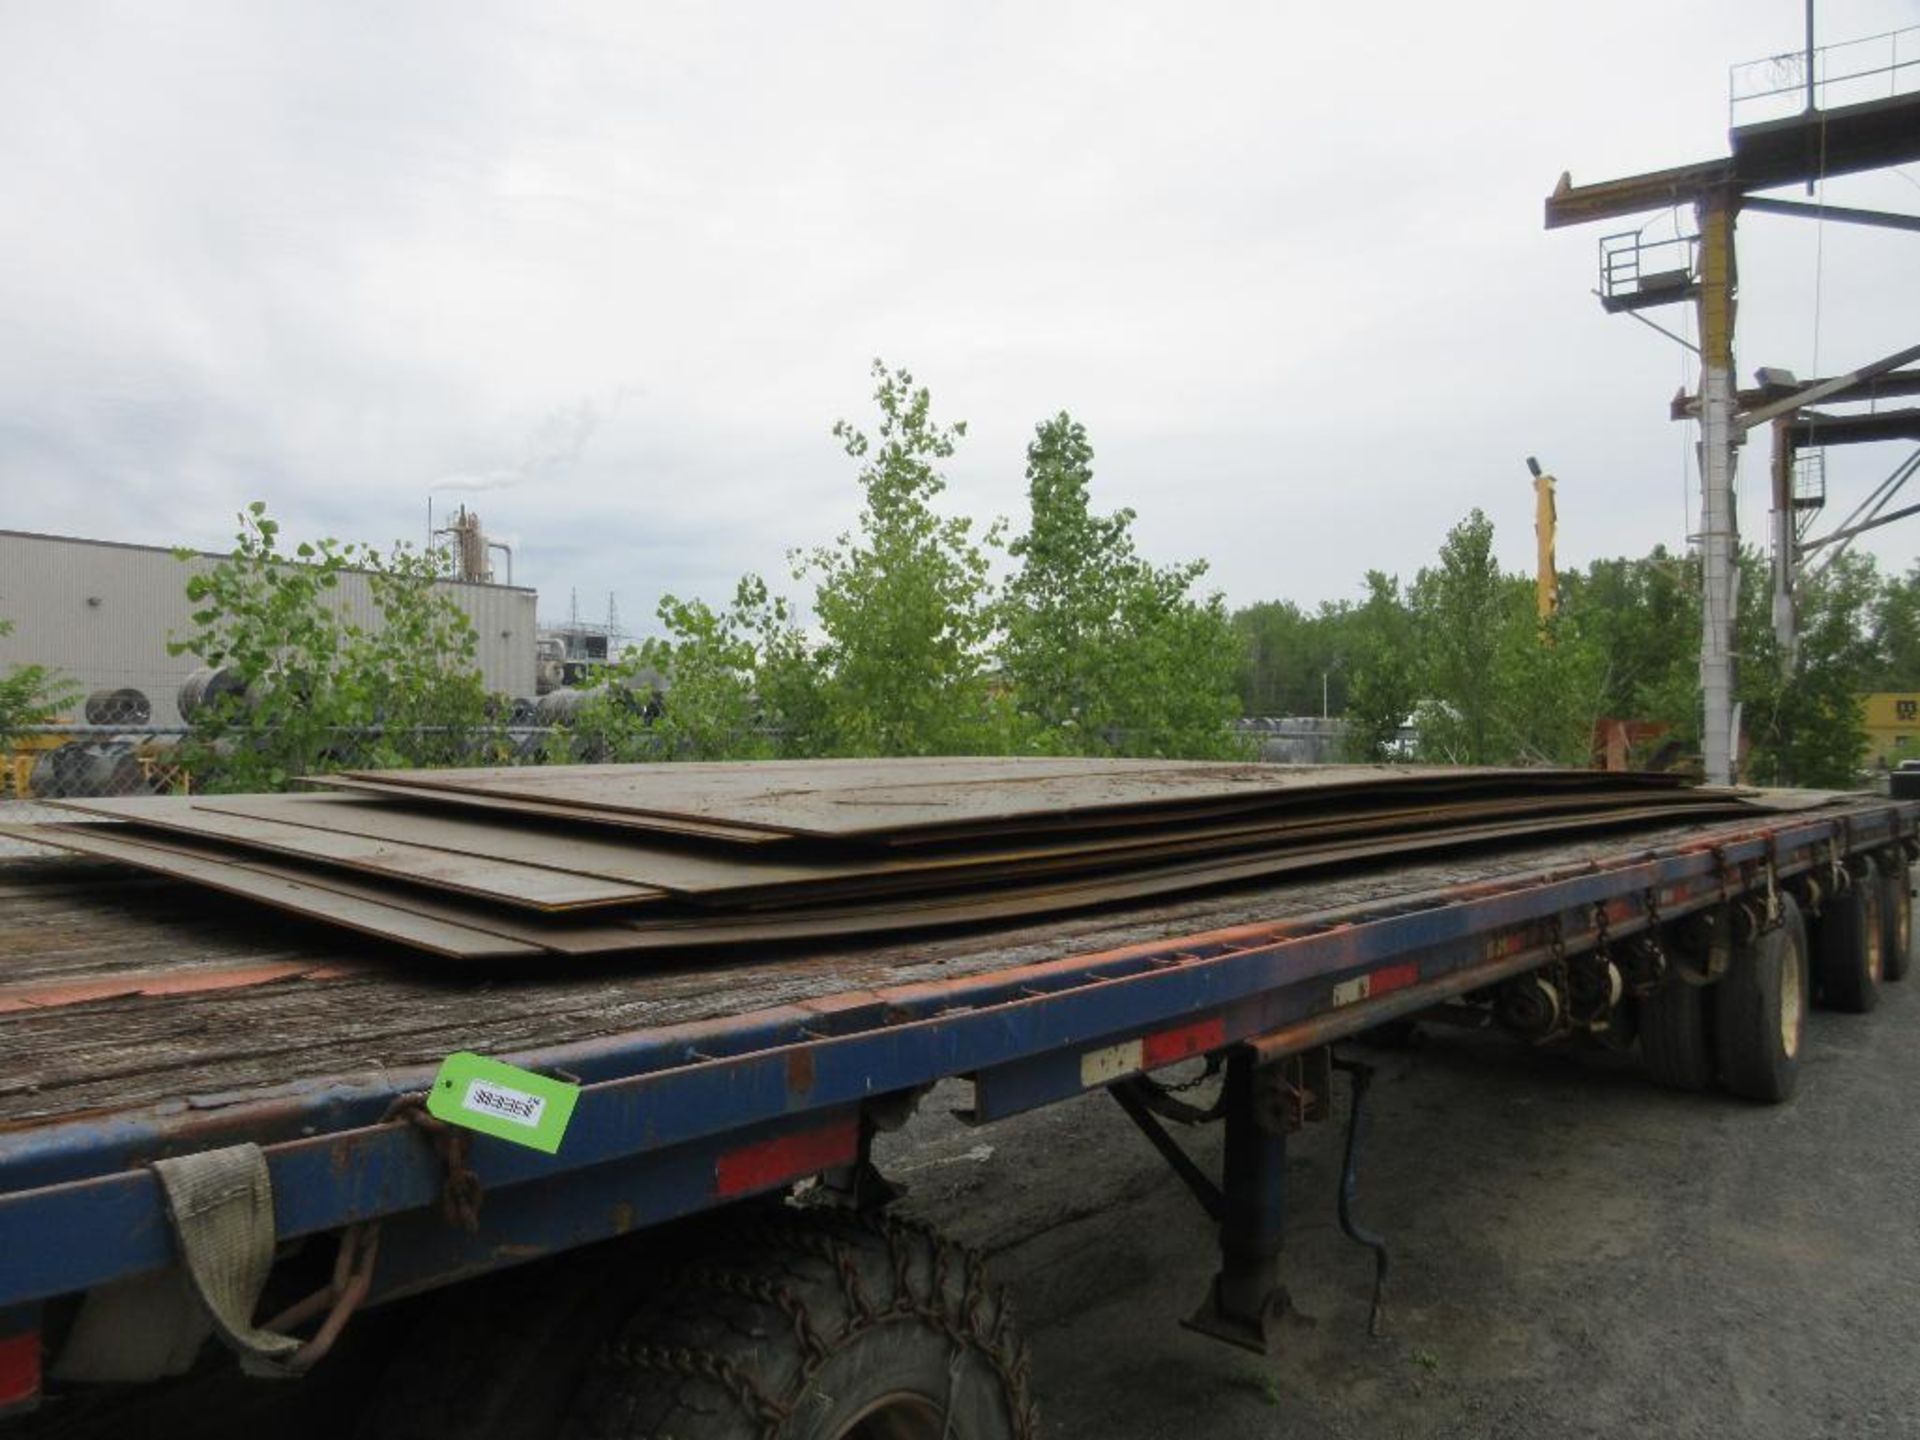 LOT OF 27 SHEETS OF PLATE STEEL ON TRAILER (NO TRAILER), TOTAL WEIGHT 293,559 LBS, SIZES PER PHOTO ( - Image 8 of 14